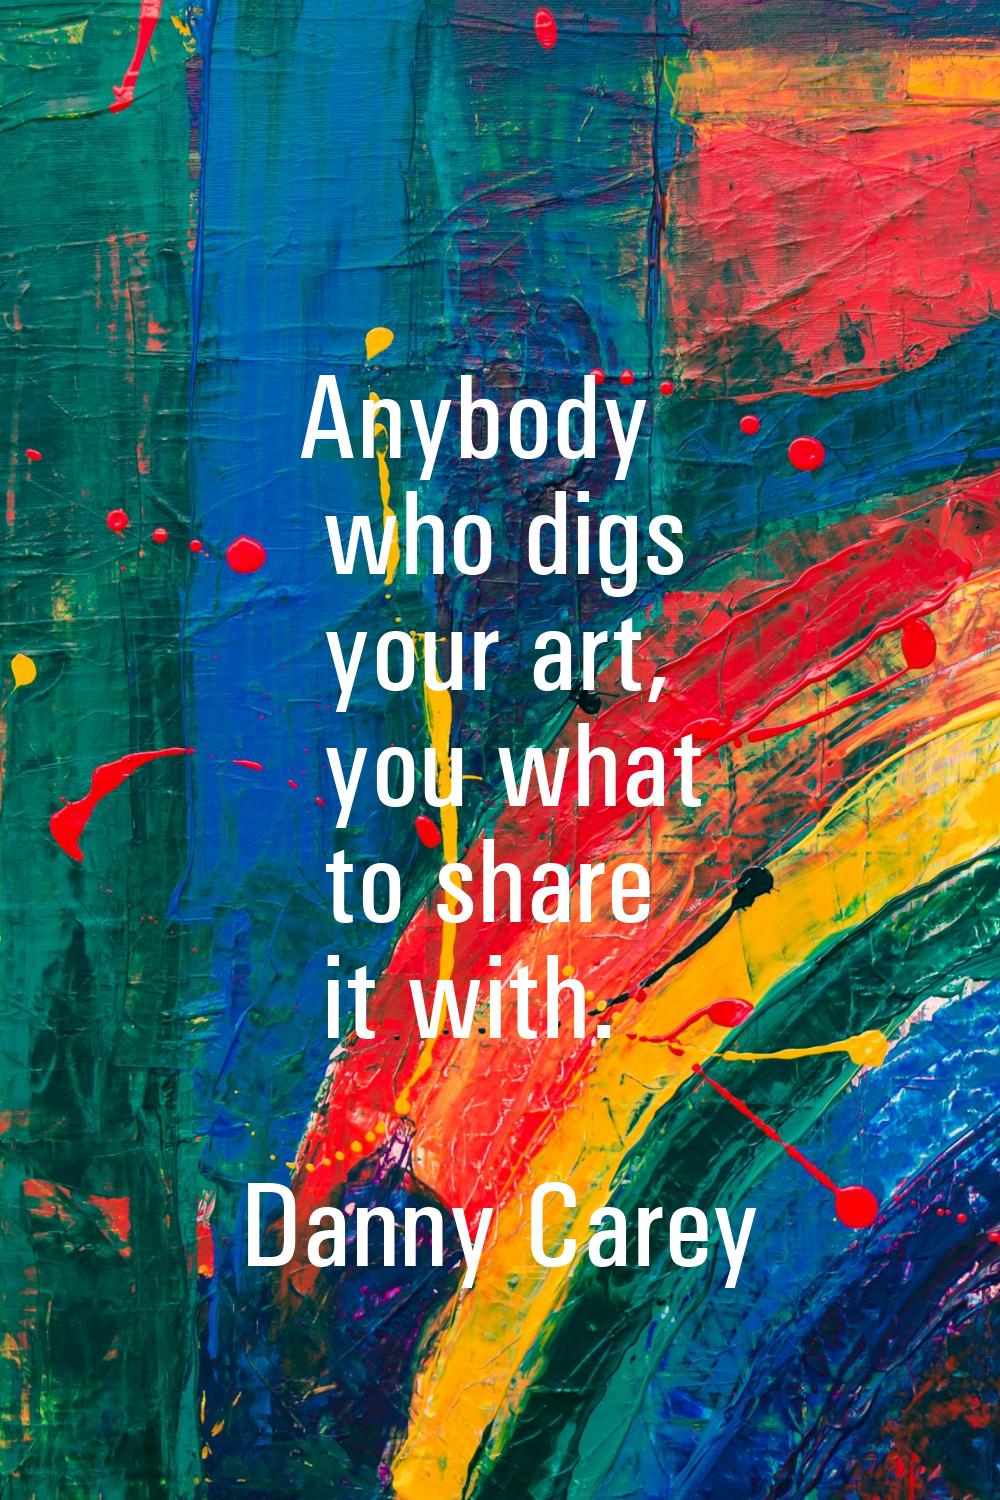 Anybody who digs your art, you what to share it with.